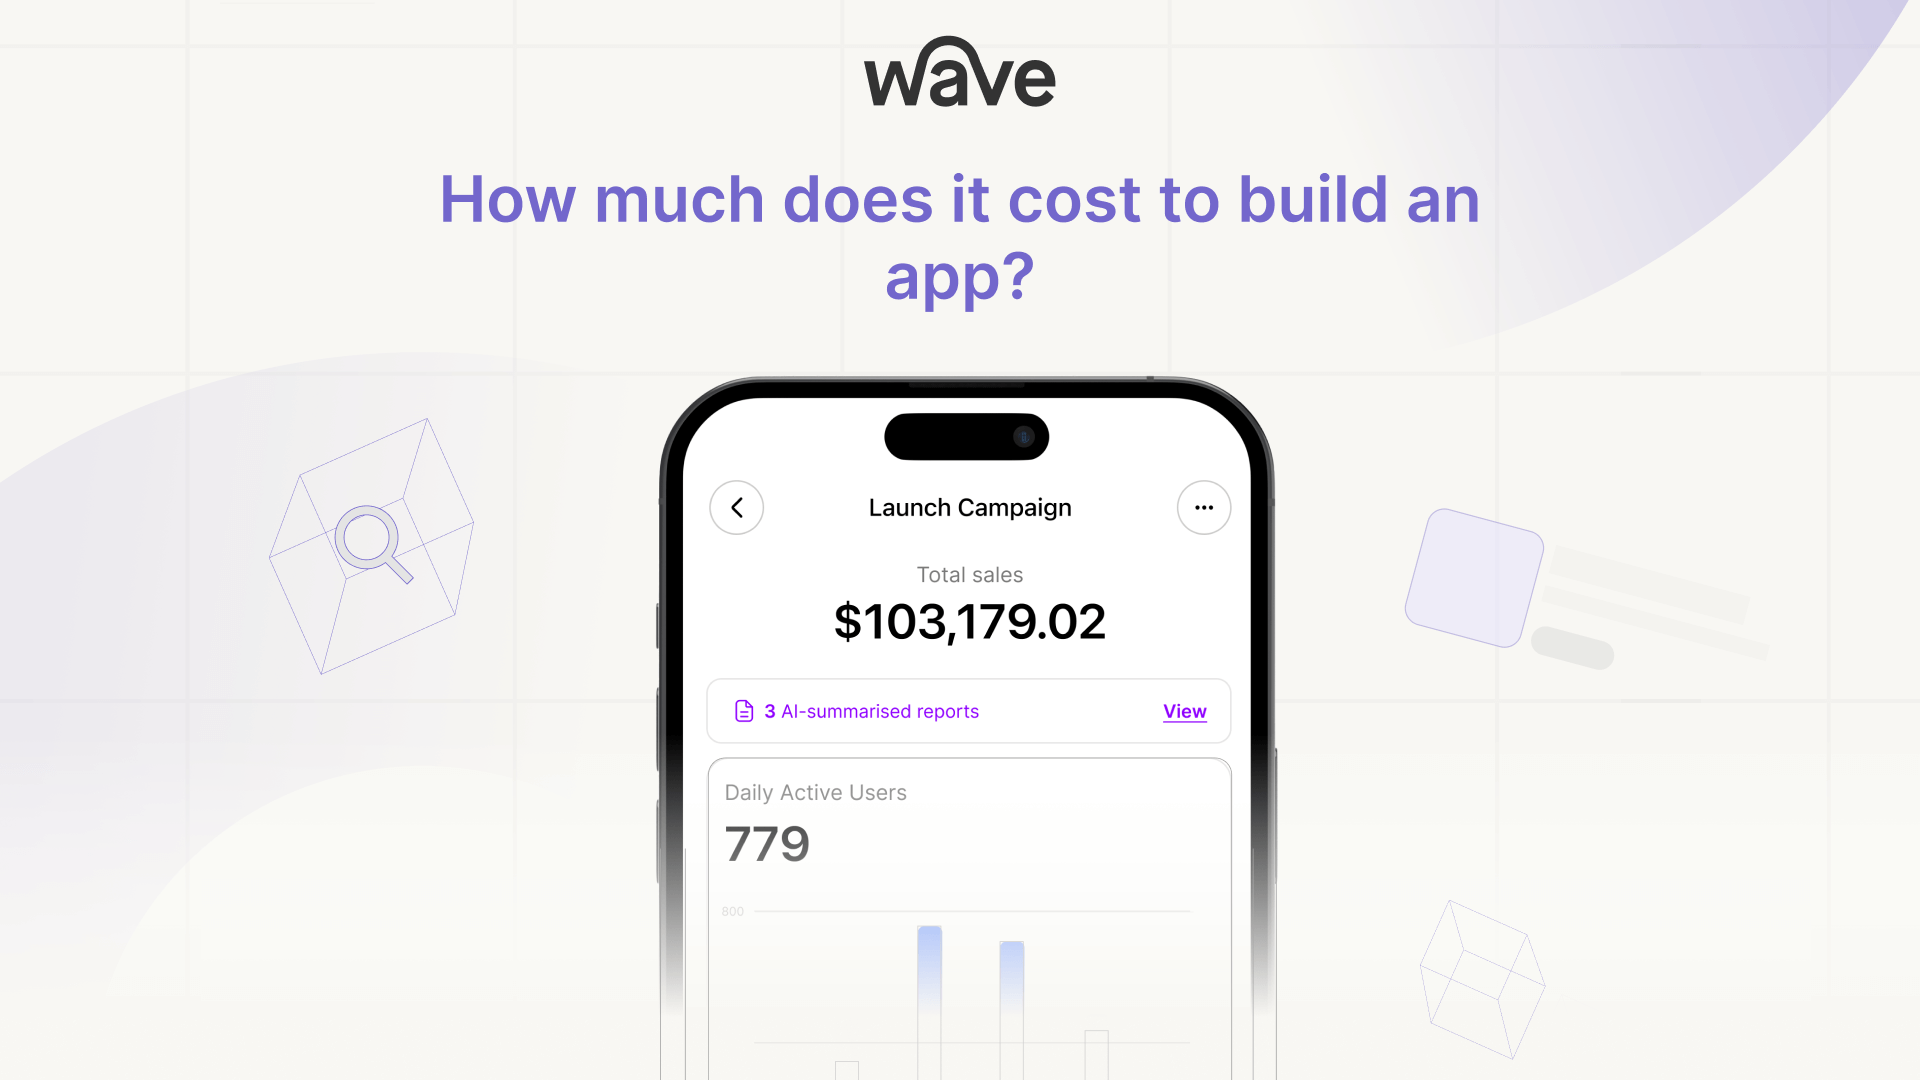 How much does it cost to build an app?